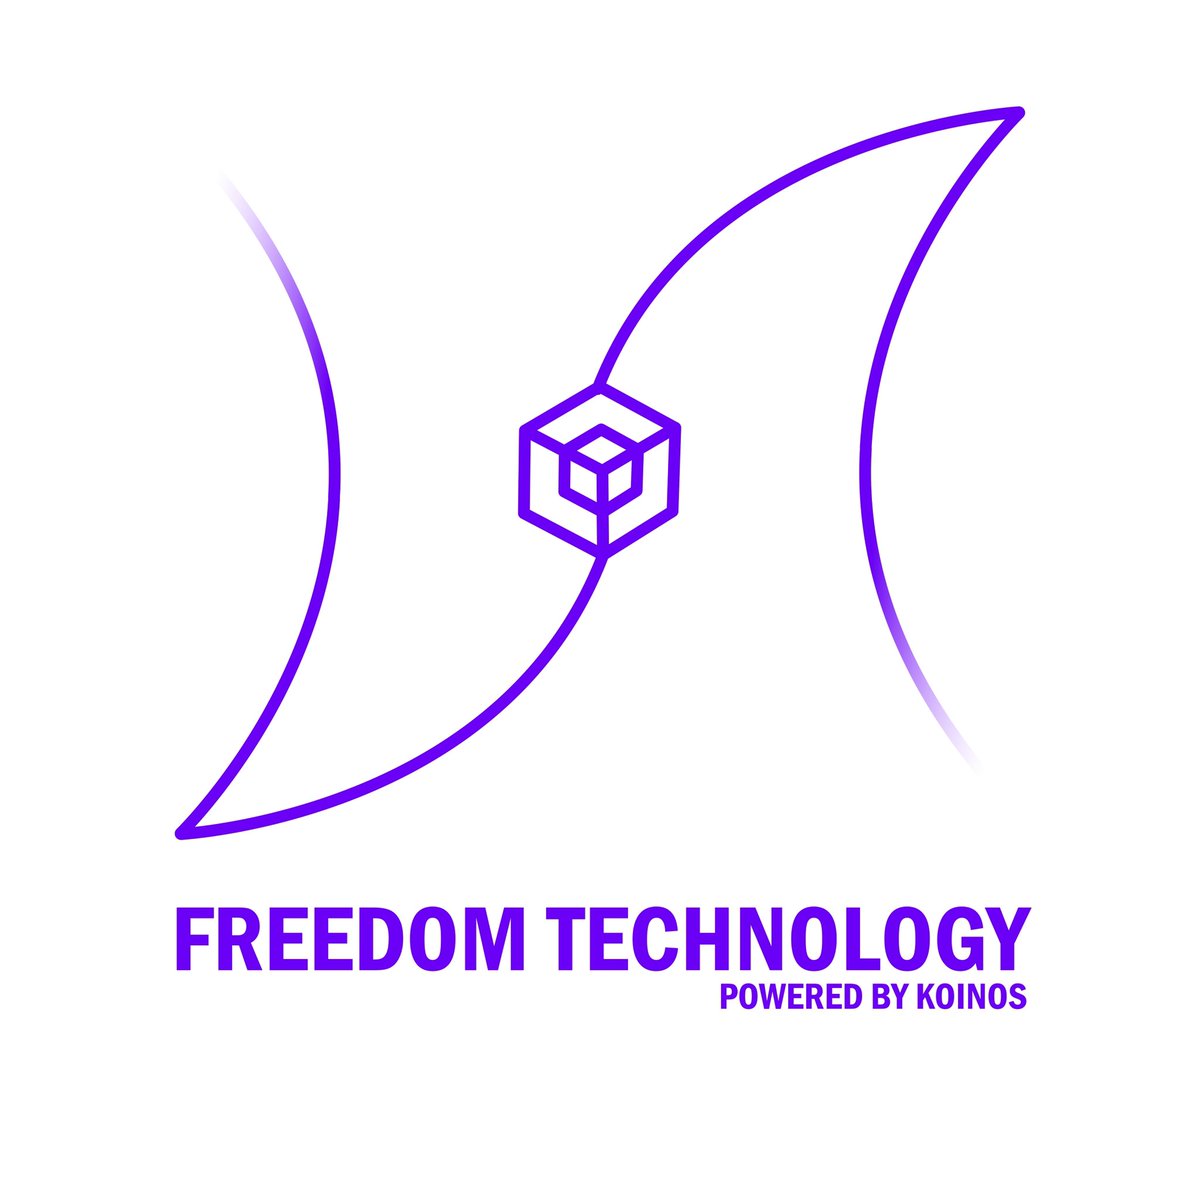 @andrarchy , here are 4 variatons of the logo: Freedom Technogy powerd by #Koinos.

A: Freedom technology is important as it enables personal control, encourages innovation and creativity through an open platform accessible to all, and ensures the protection of personal data.